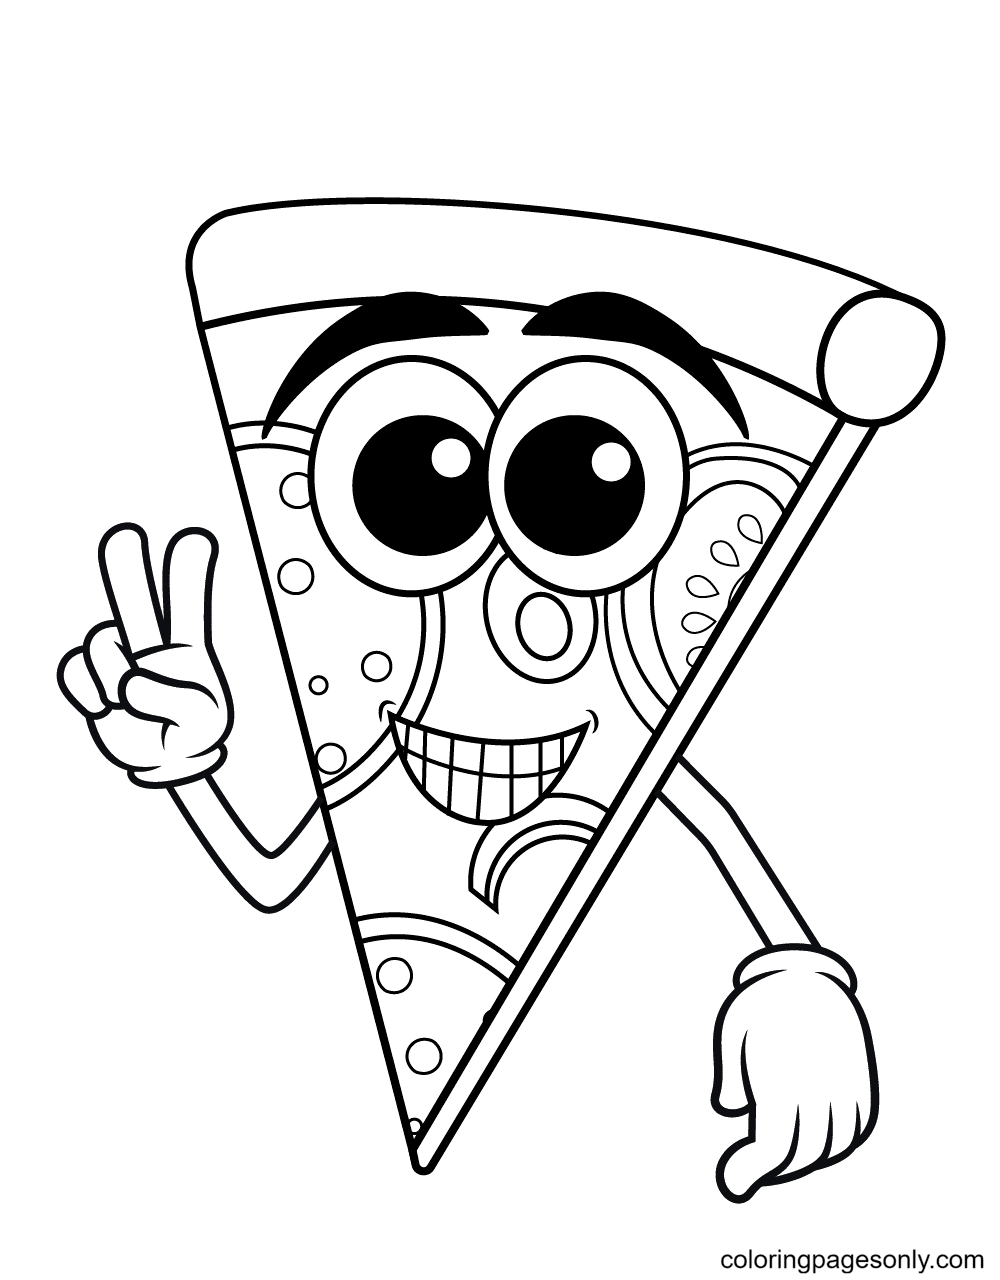 Funny Slice of Pizza Coloring Page